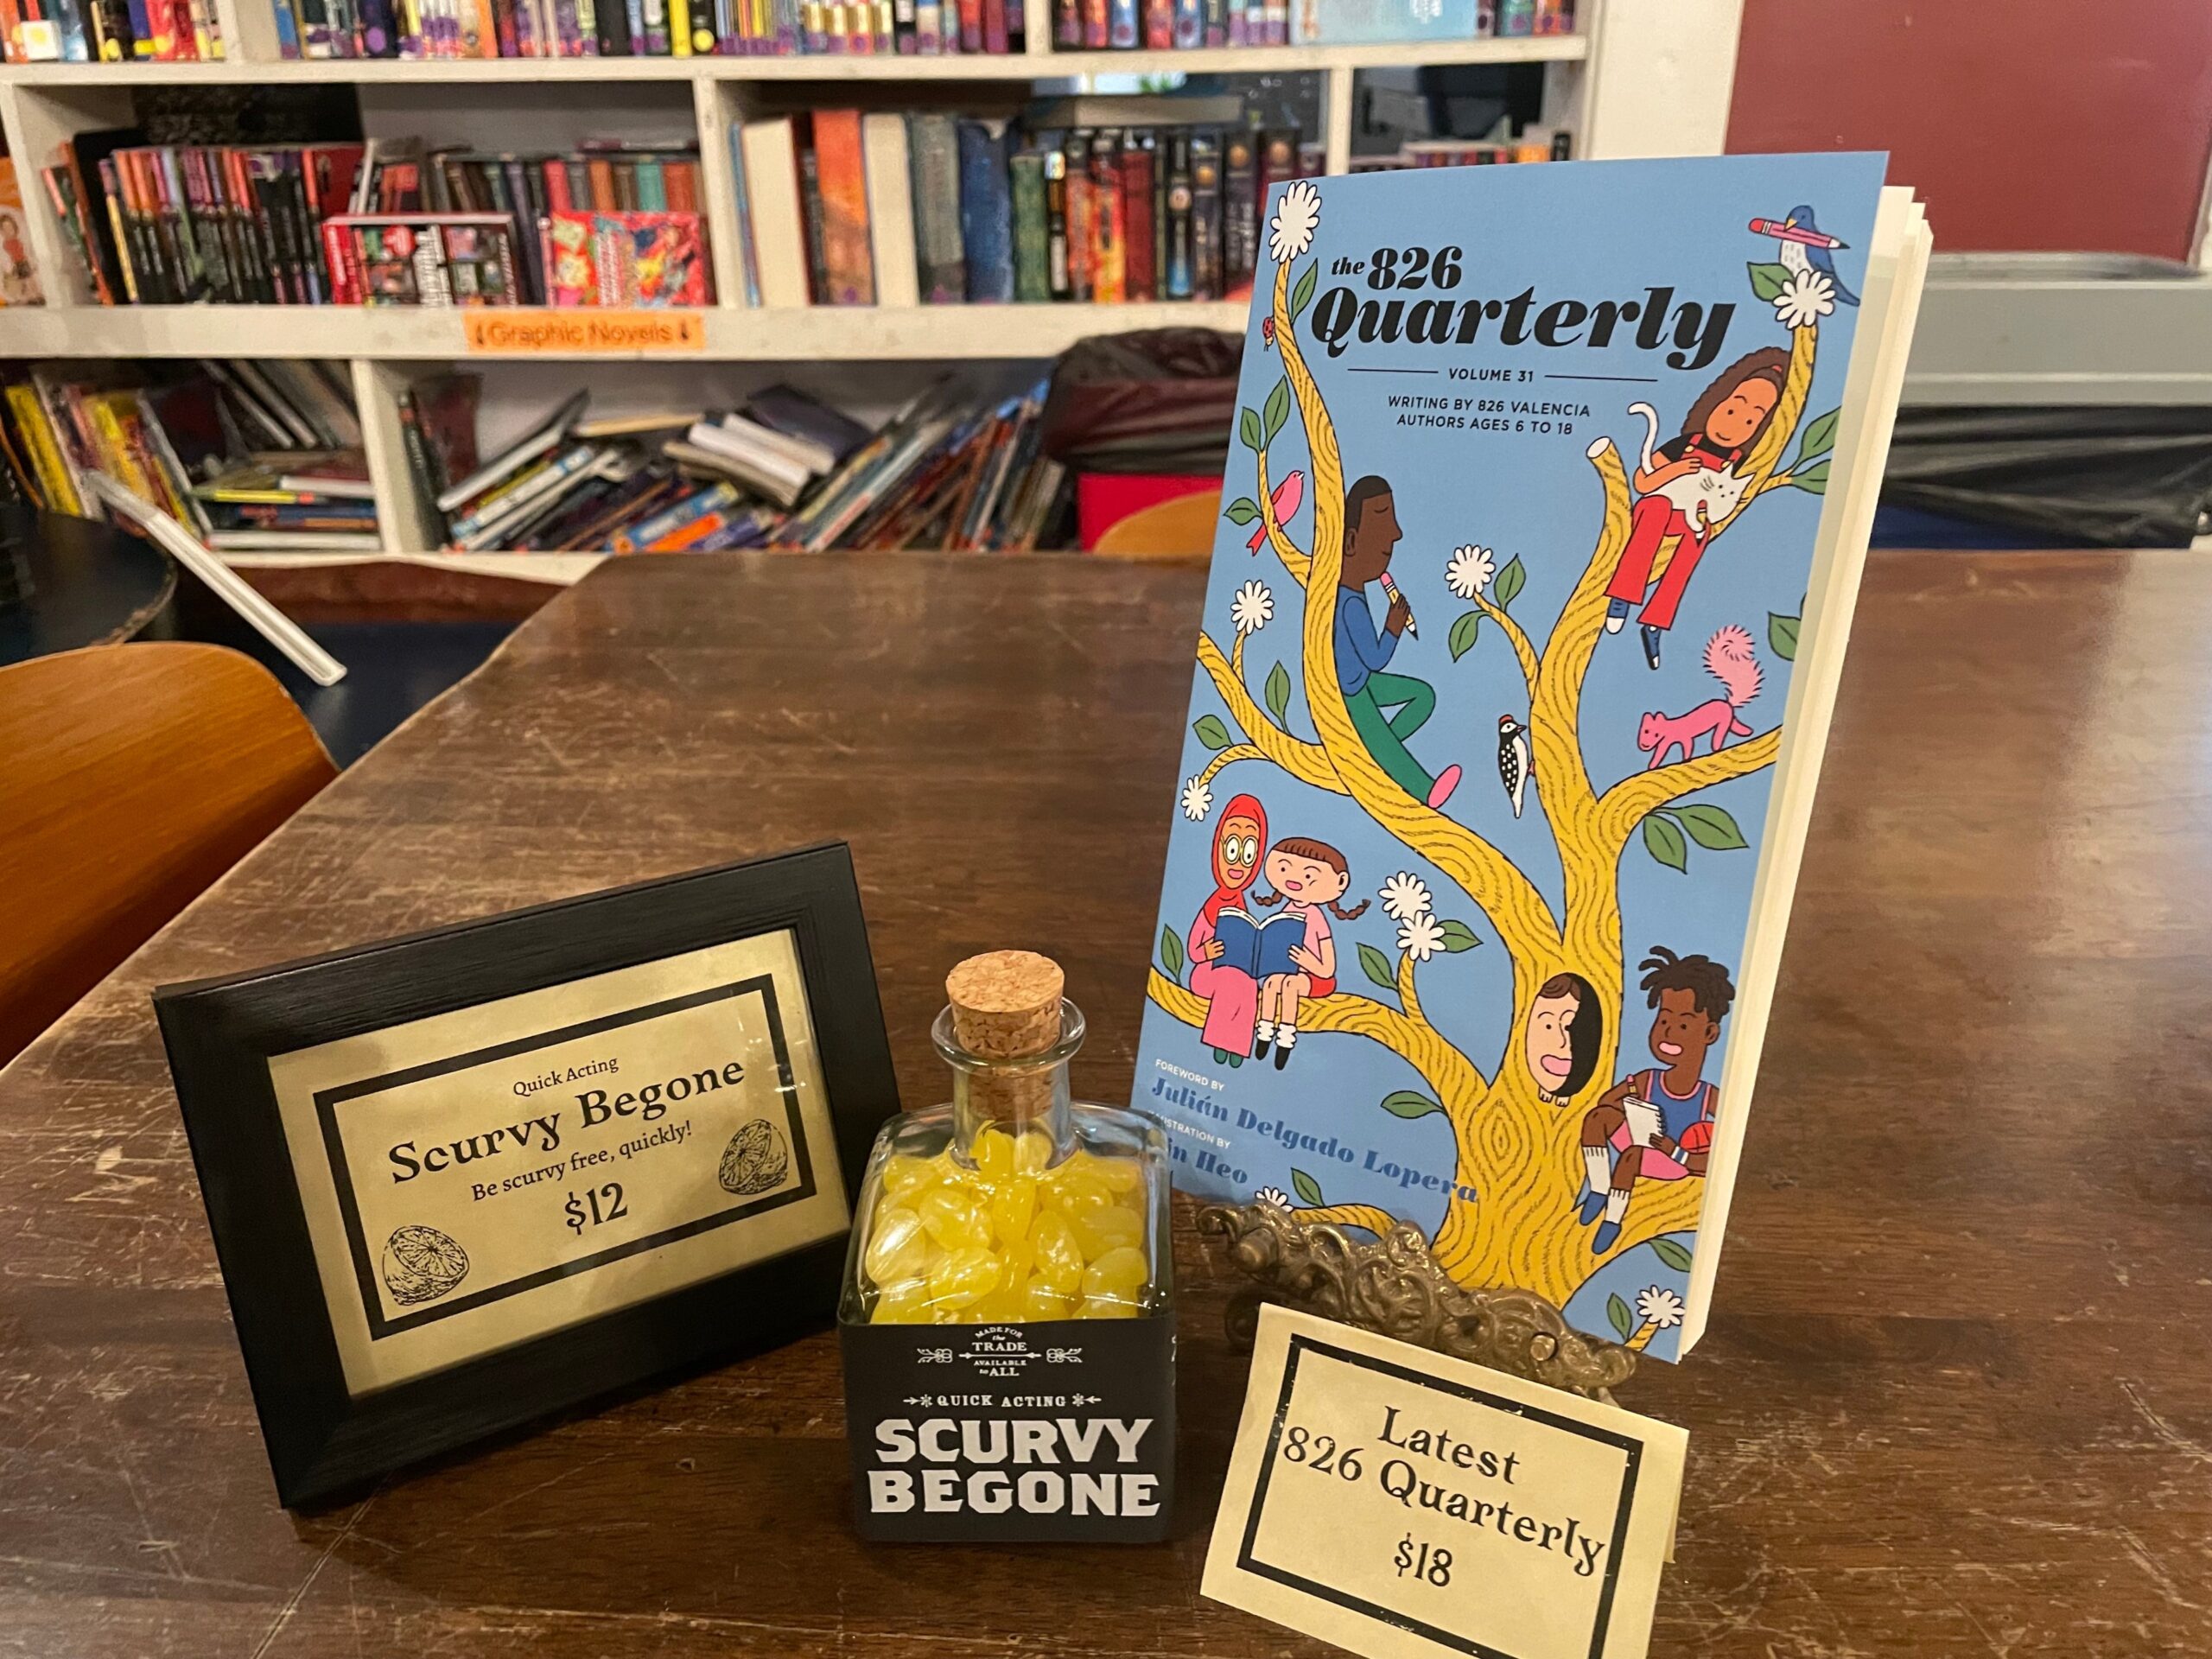 A "Scurvy Begone" bottle of candy and a children's literary journal sit on a a wooden table in a pirate-themed storefront.